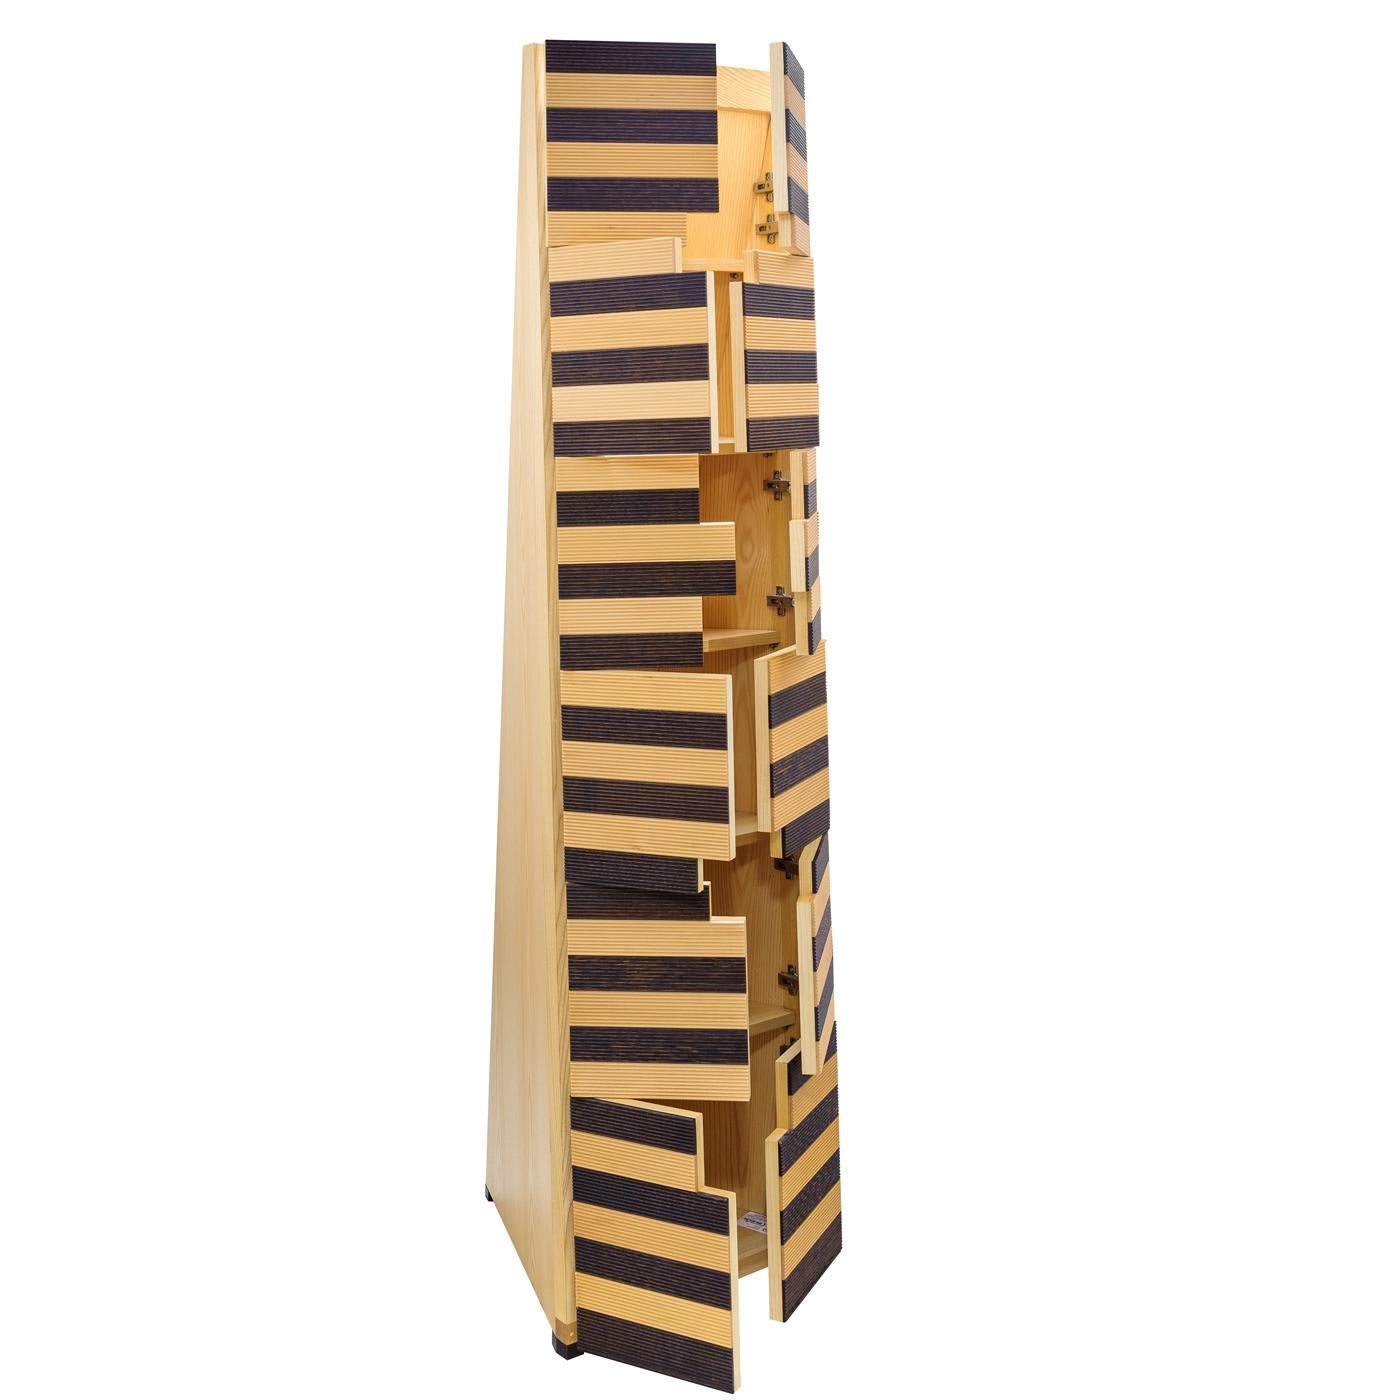 Reminiscent of Bauhaus furniture, the sleek lines and bold forms of this striking cabinet will bring a sophisticated accent to a modern living room. This cabinet has a trapezoidal base made of ash that supports a structure of alternating planks of